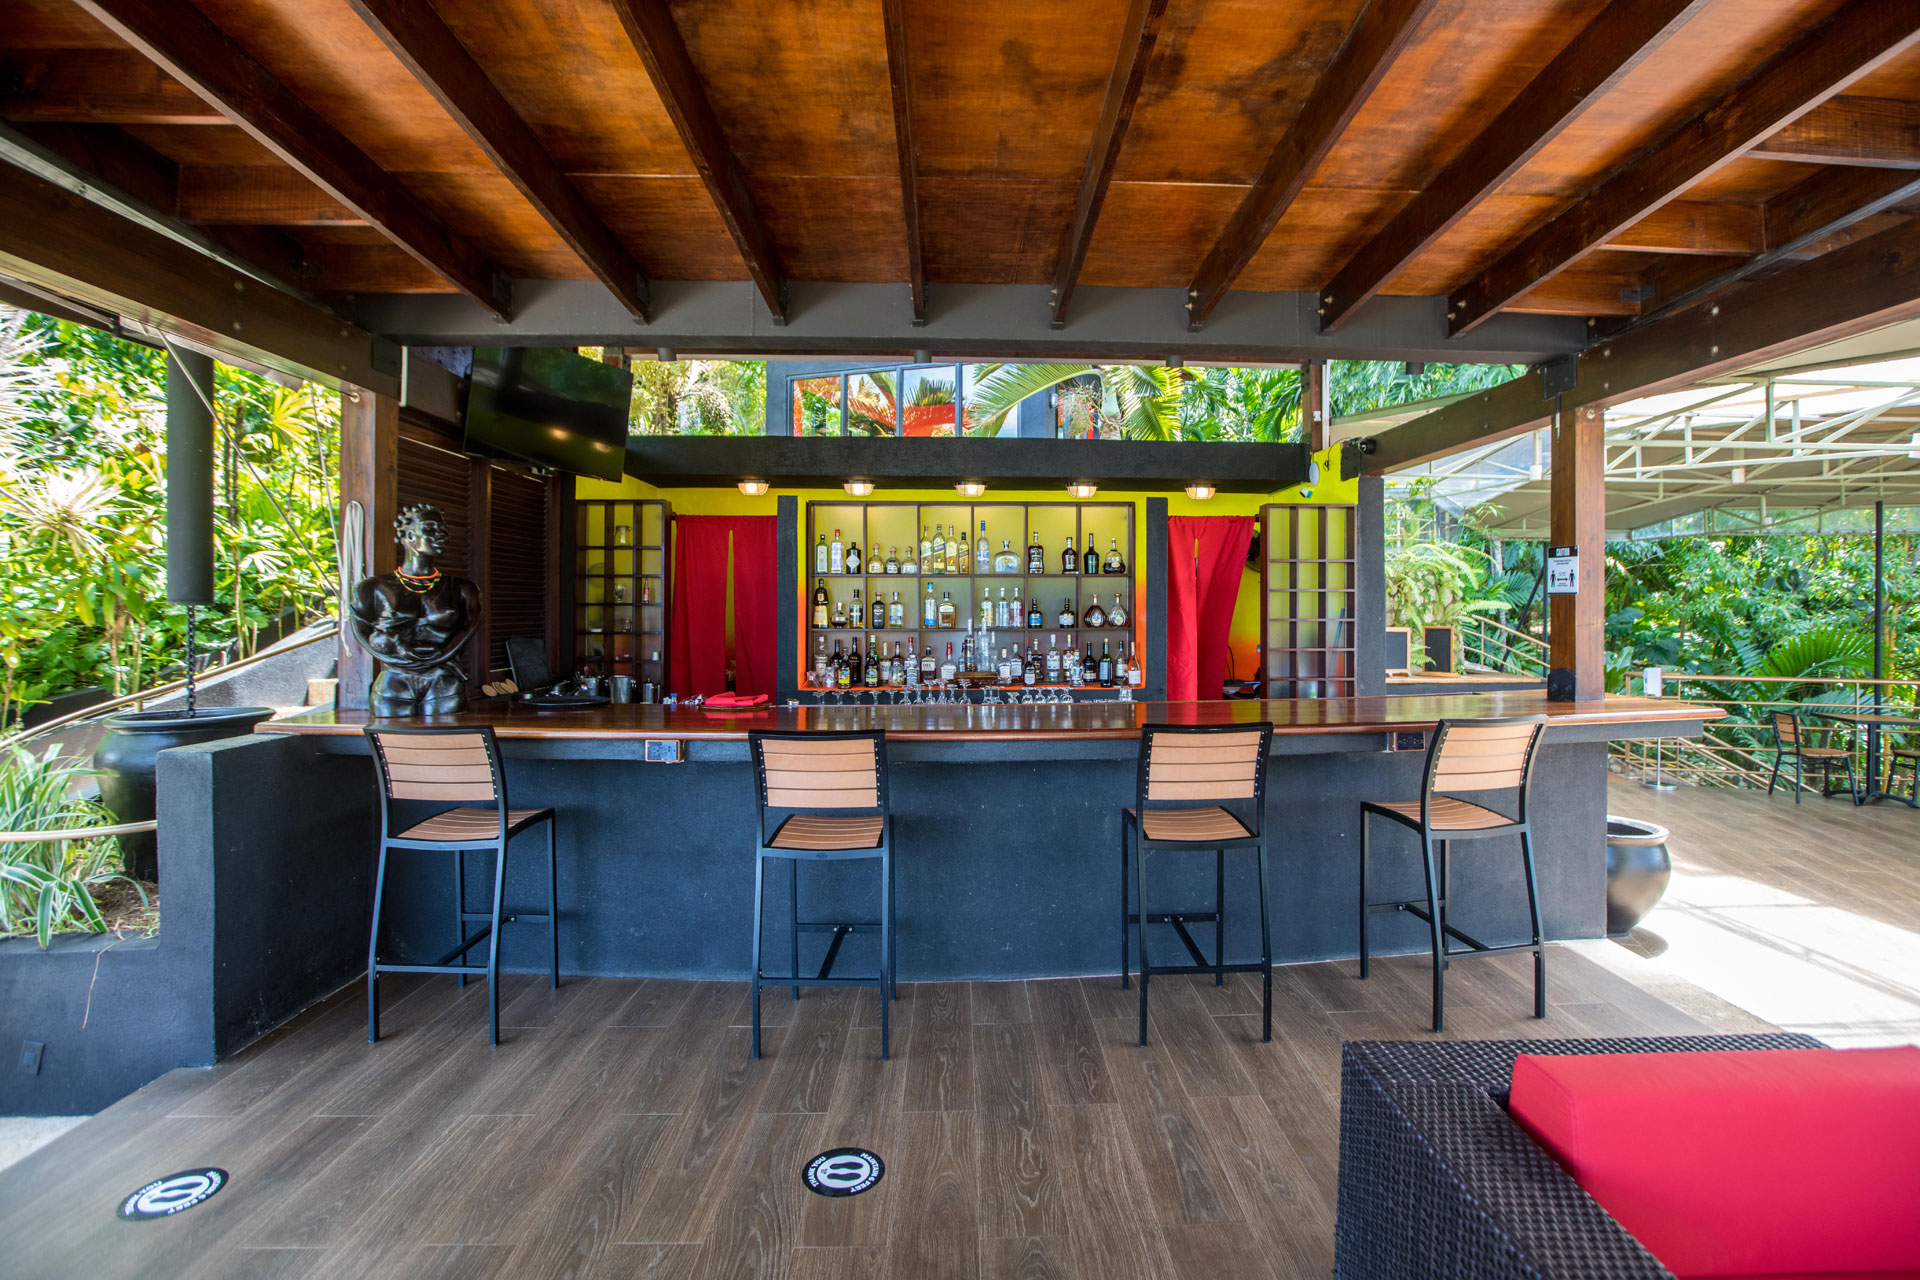 Outdoor bar with wooden beams and rainforest views.